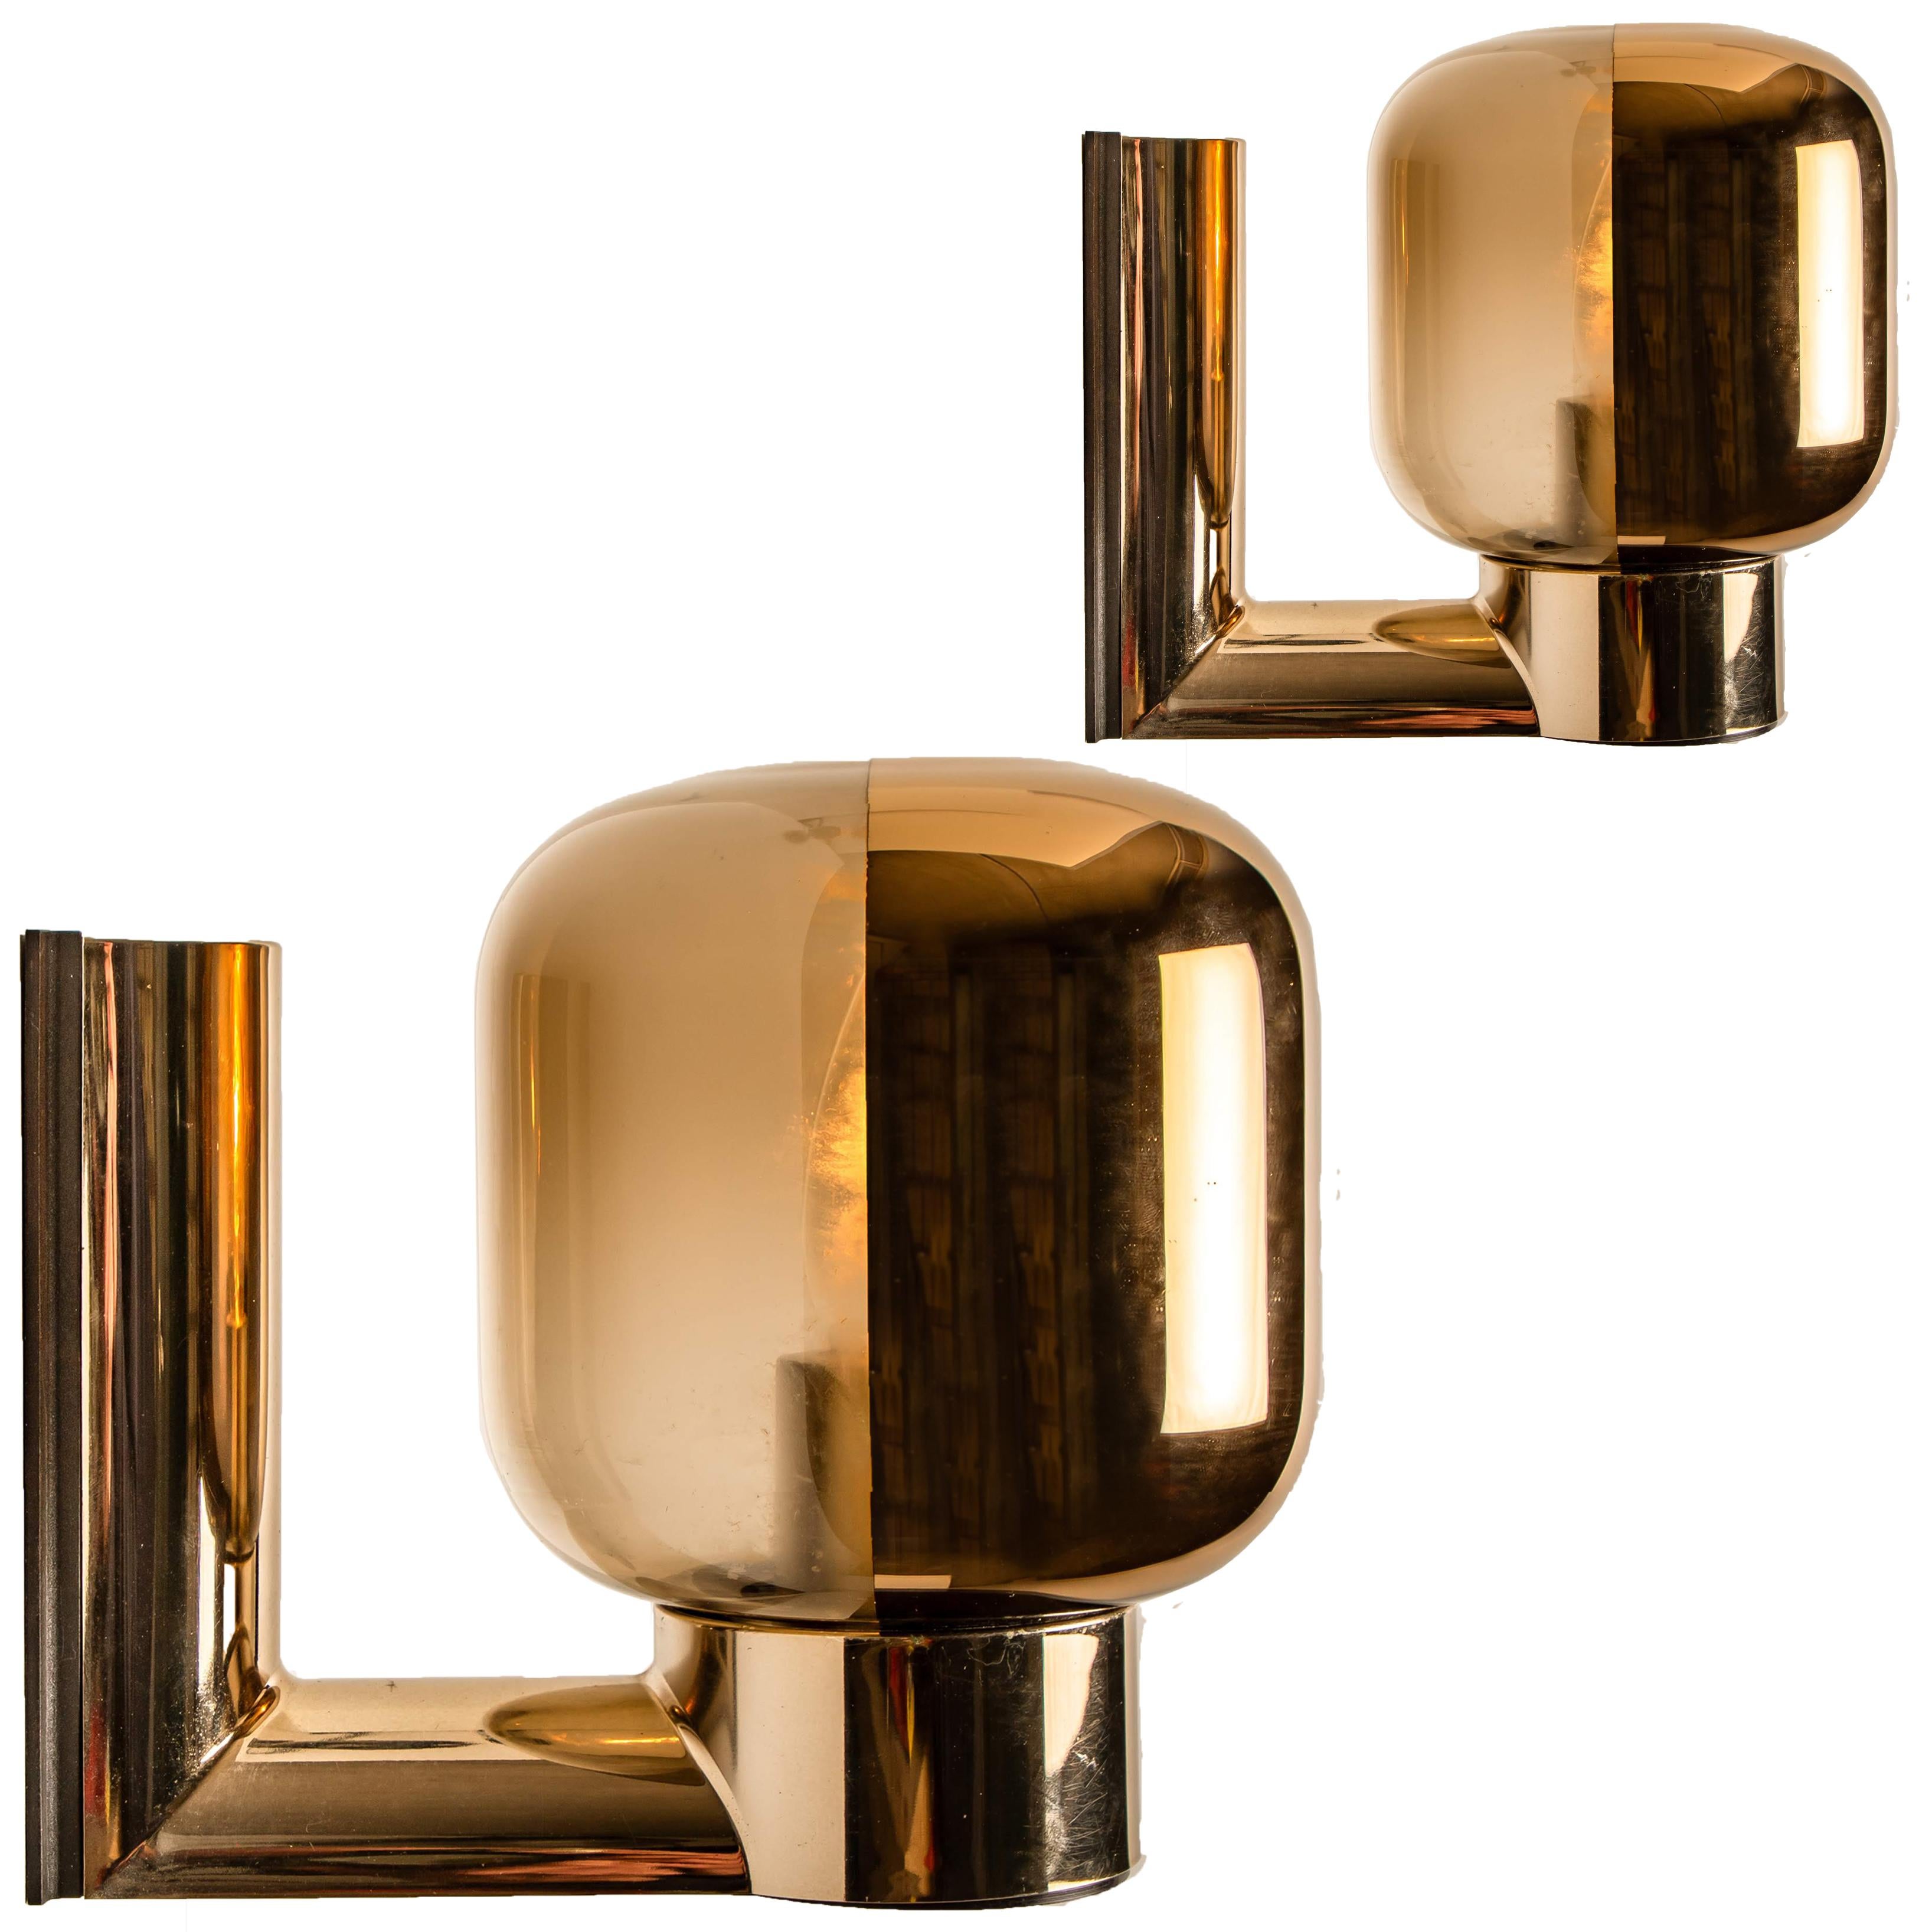 One of the six amazing wall sconces manufactured by Staff made of smoked glass, synthetic material and brass. It is possible to switch the light bowl in another position for a different light direction.

Very heavy quality, in good vintage